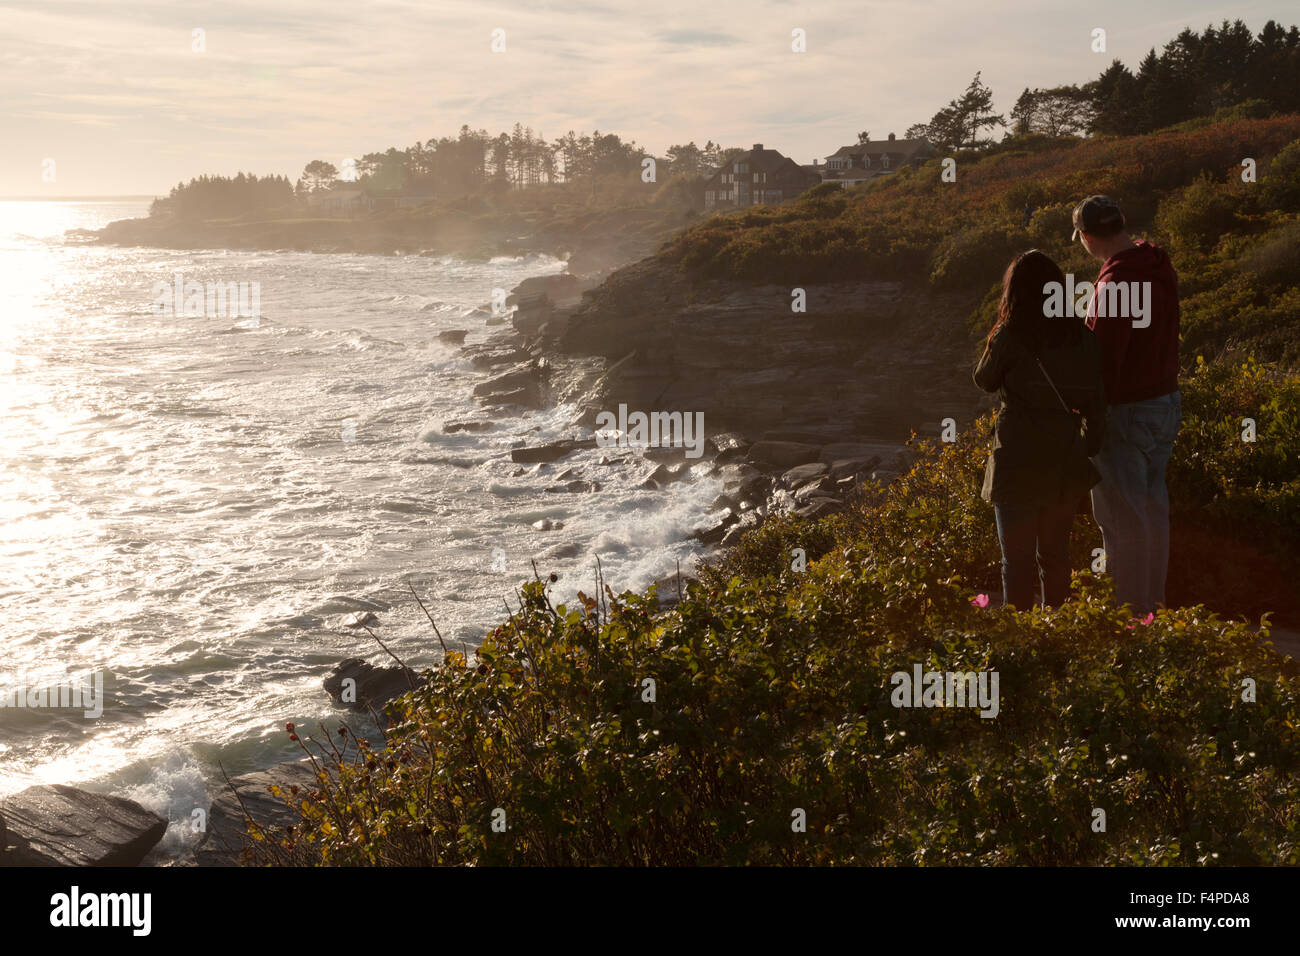 A couple at Cape Elizabeth on the Maine coastline at sunset, Cape Elizabeth, Maine USA Stock Photo